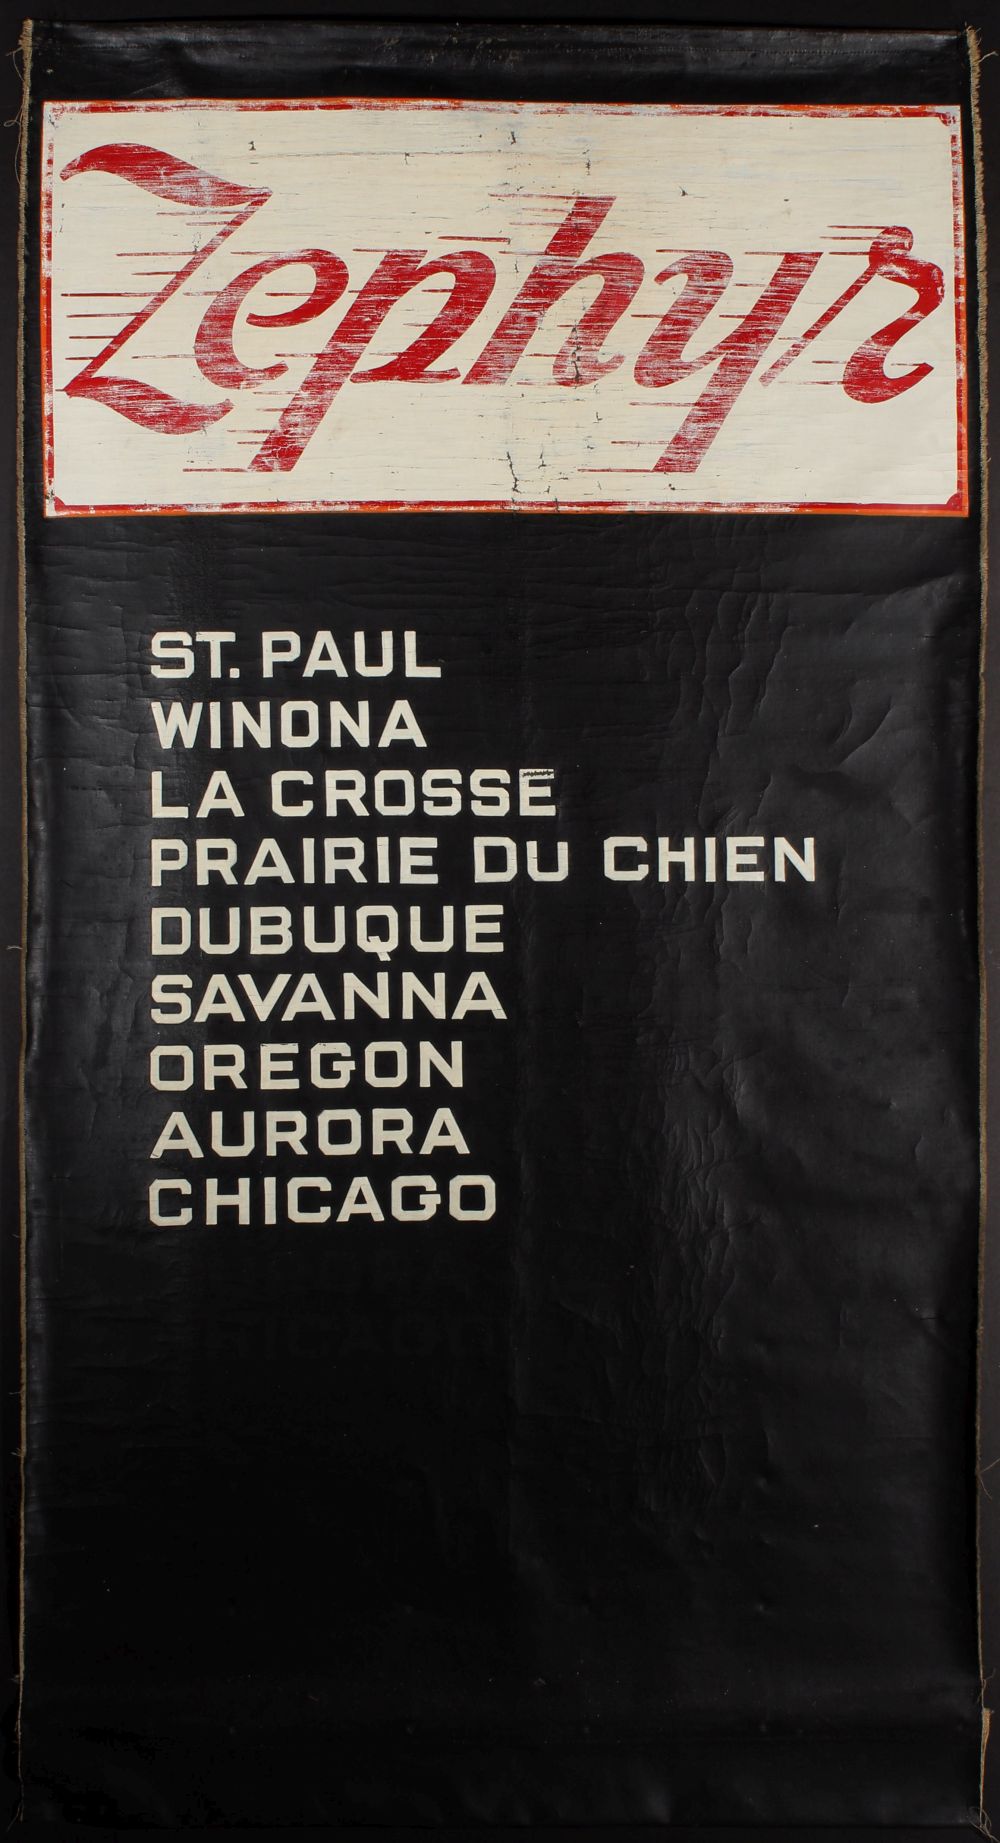 A PAINTED CANVAS GATE SIGN FOR THE C.B.&Q RR ZEPHYR